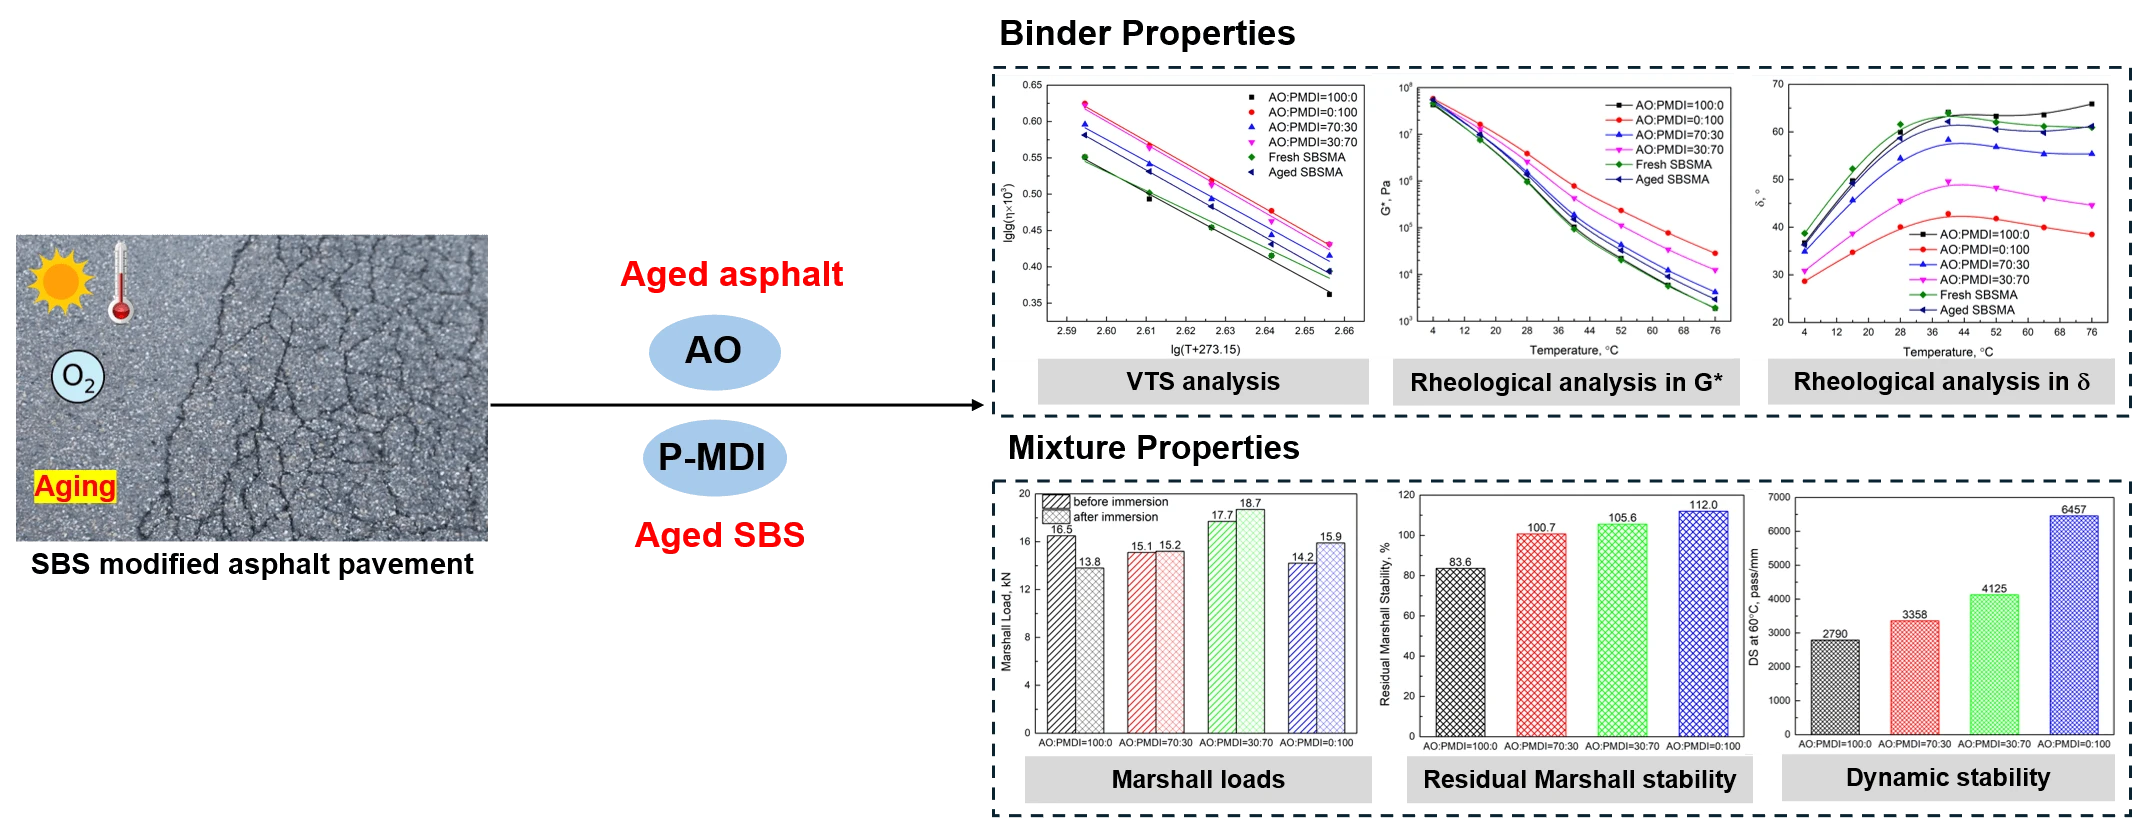 Physical-Rheological Properties and Performances of Rejuvenated (Styrene-Butadiene-Styrene) Asphalt with Polymerized-MDI and Aromatic Oil